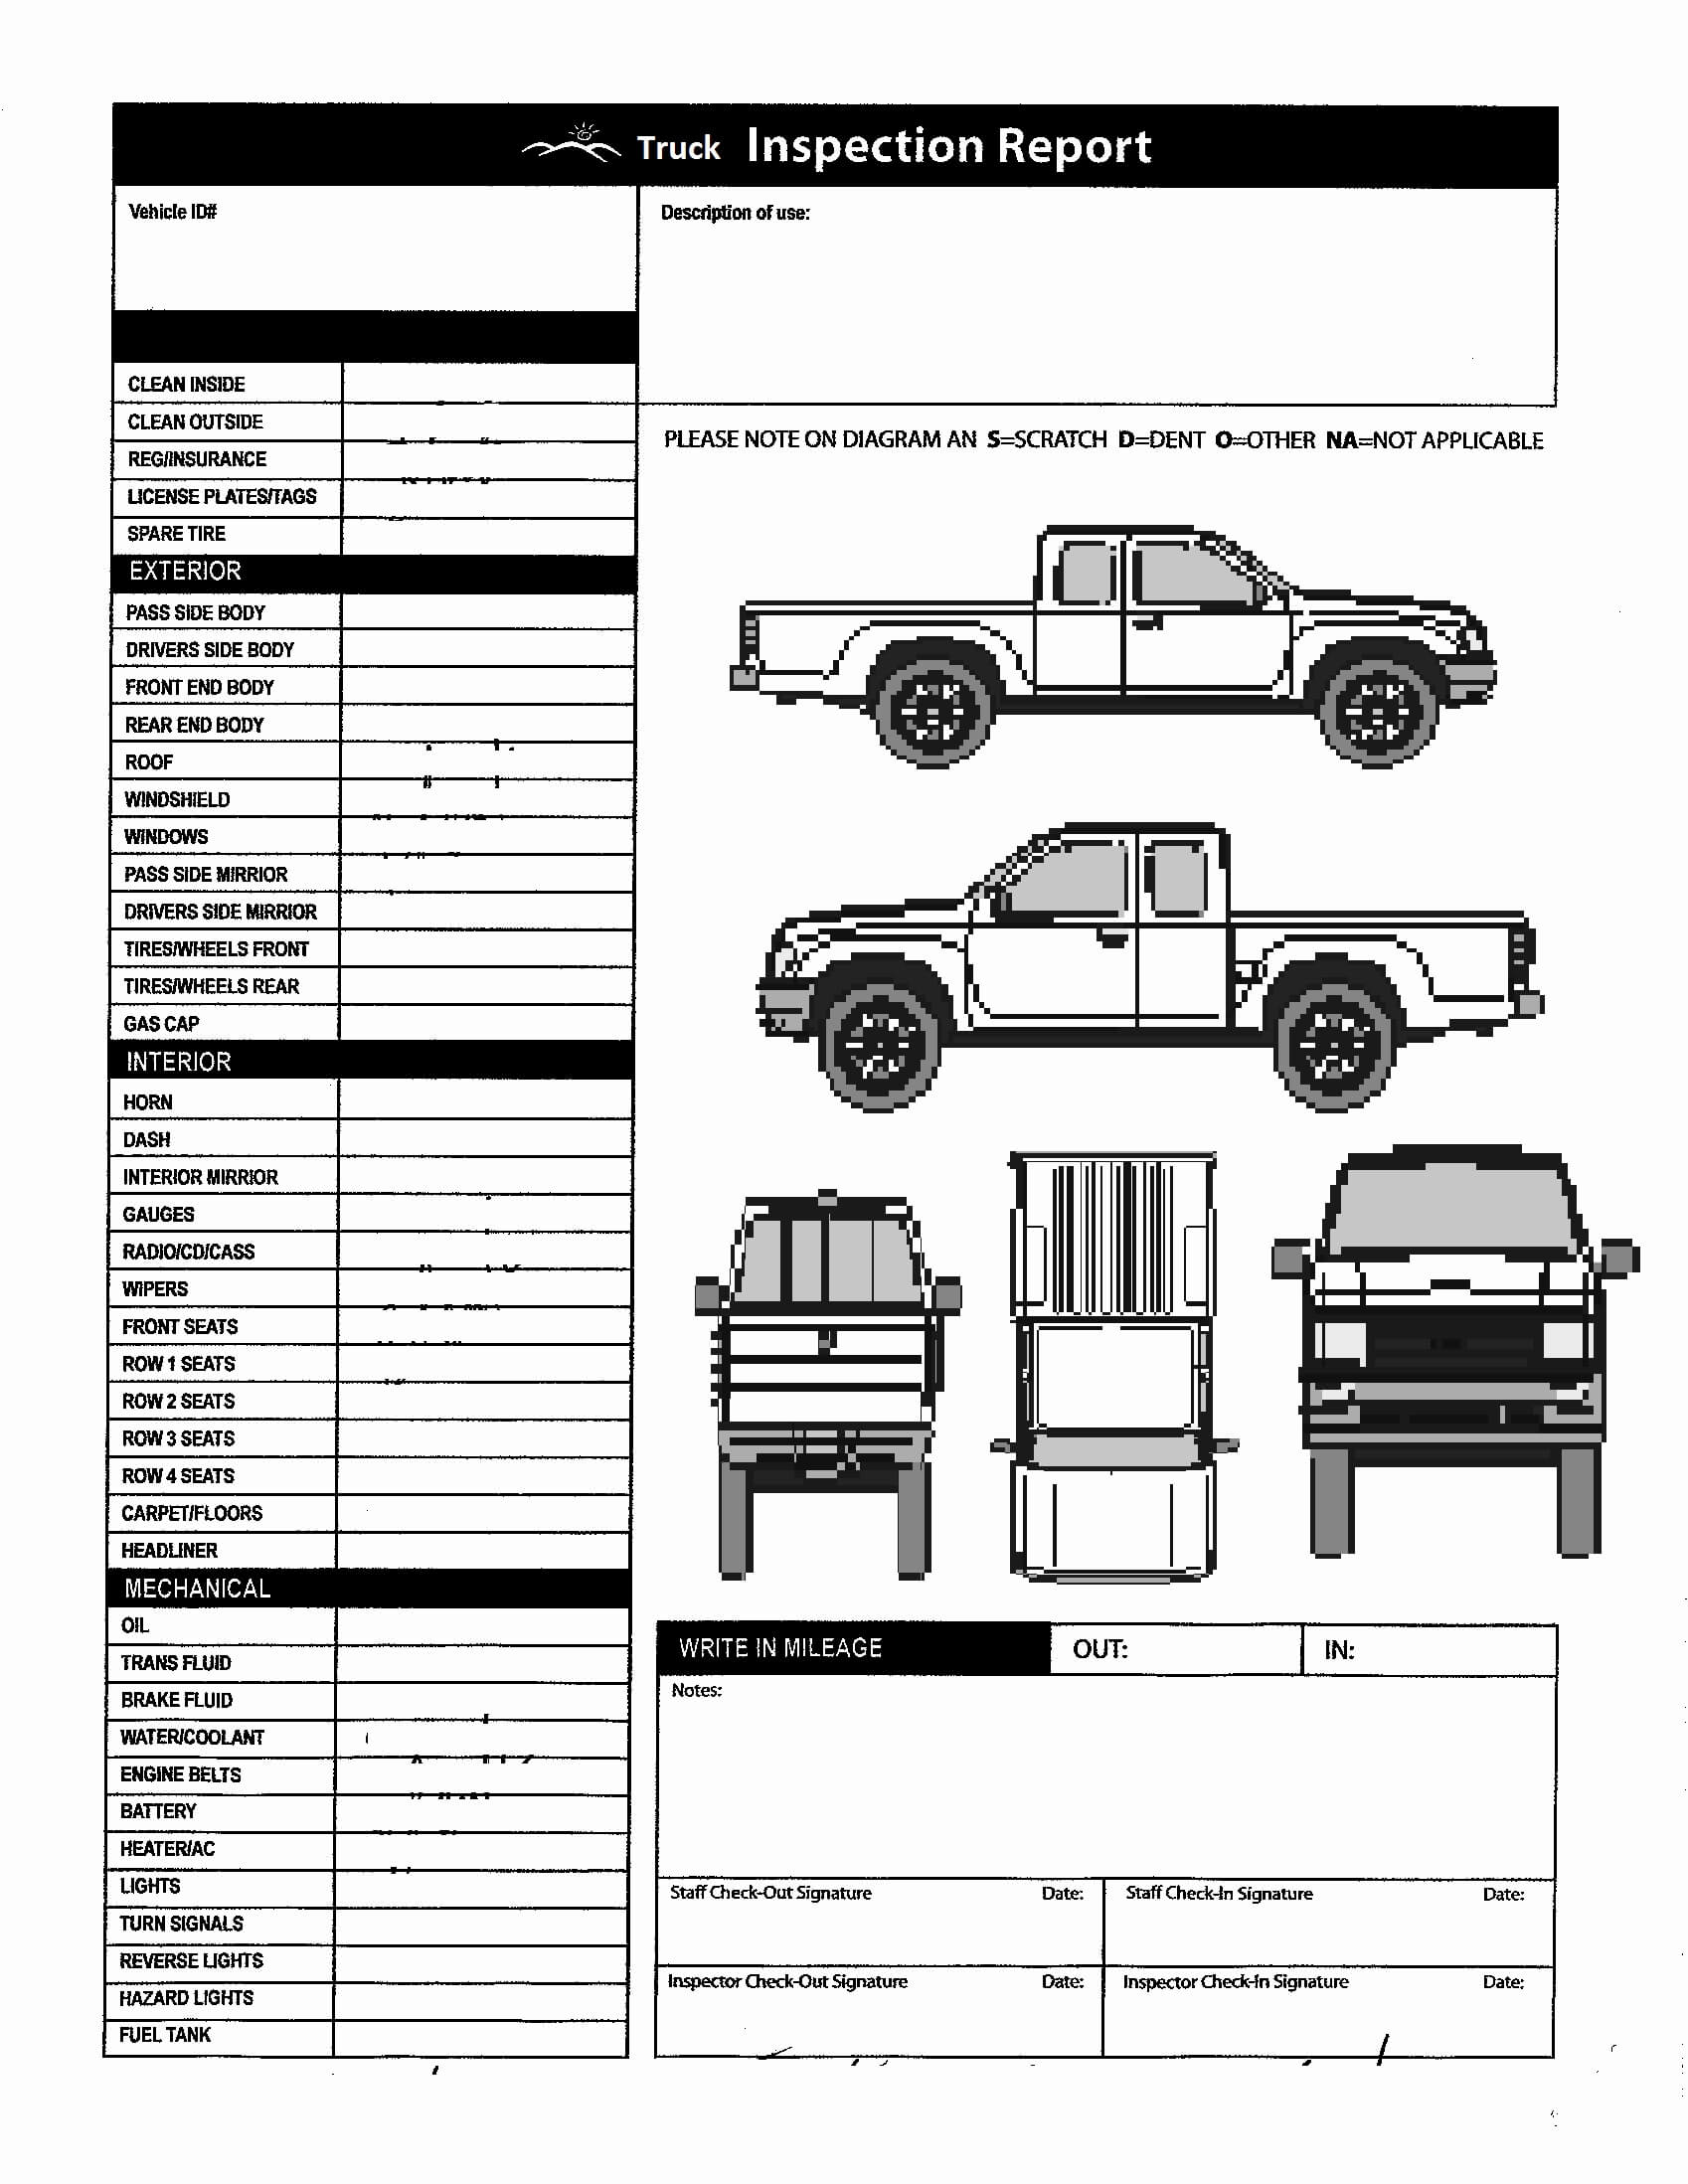 Download Vehicle Inspection Report Template | Cialis Within Vehicle Inspection Report Template